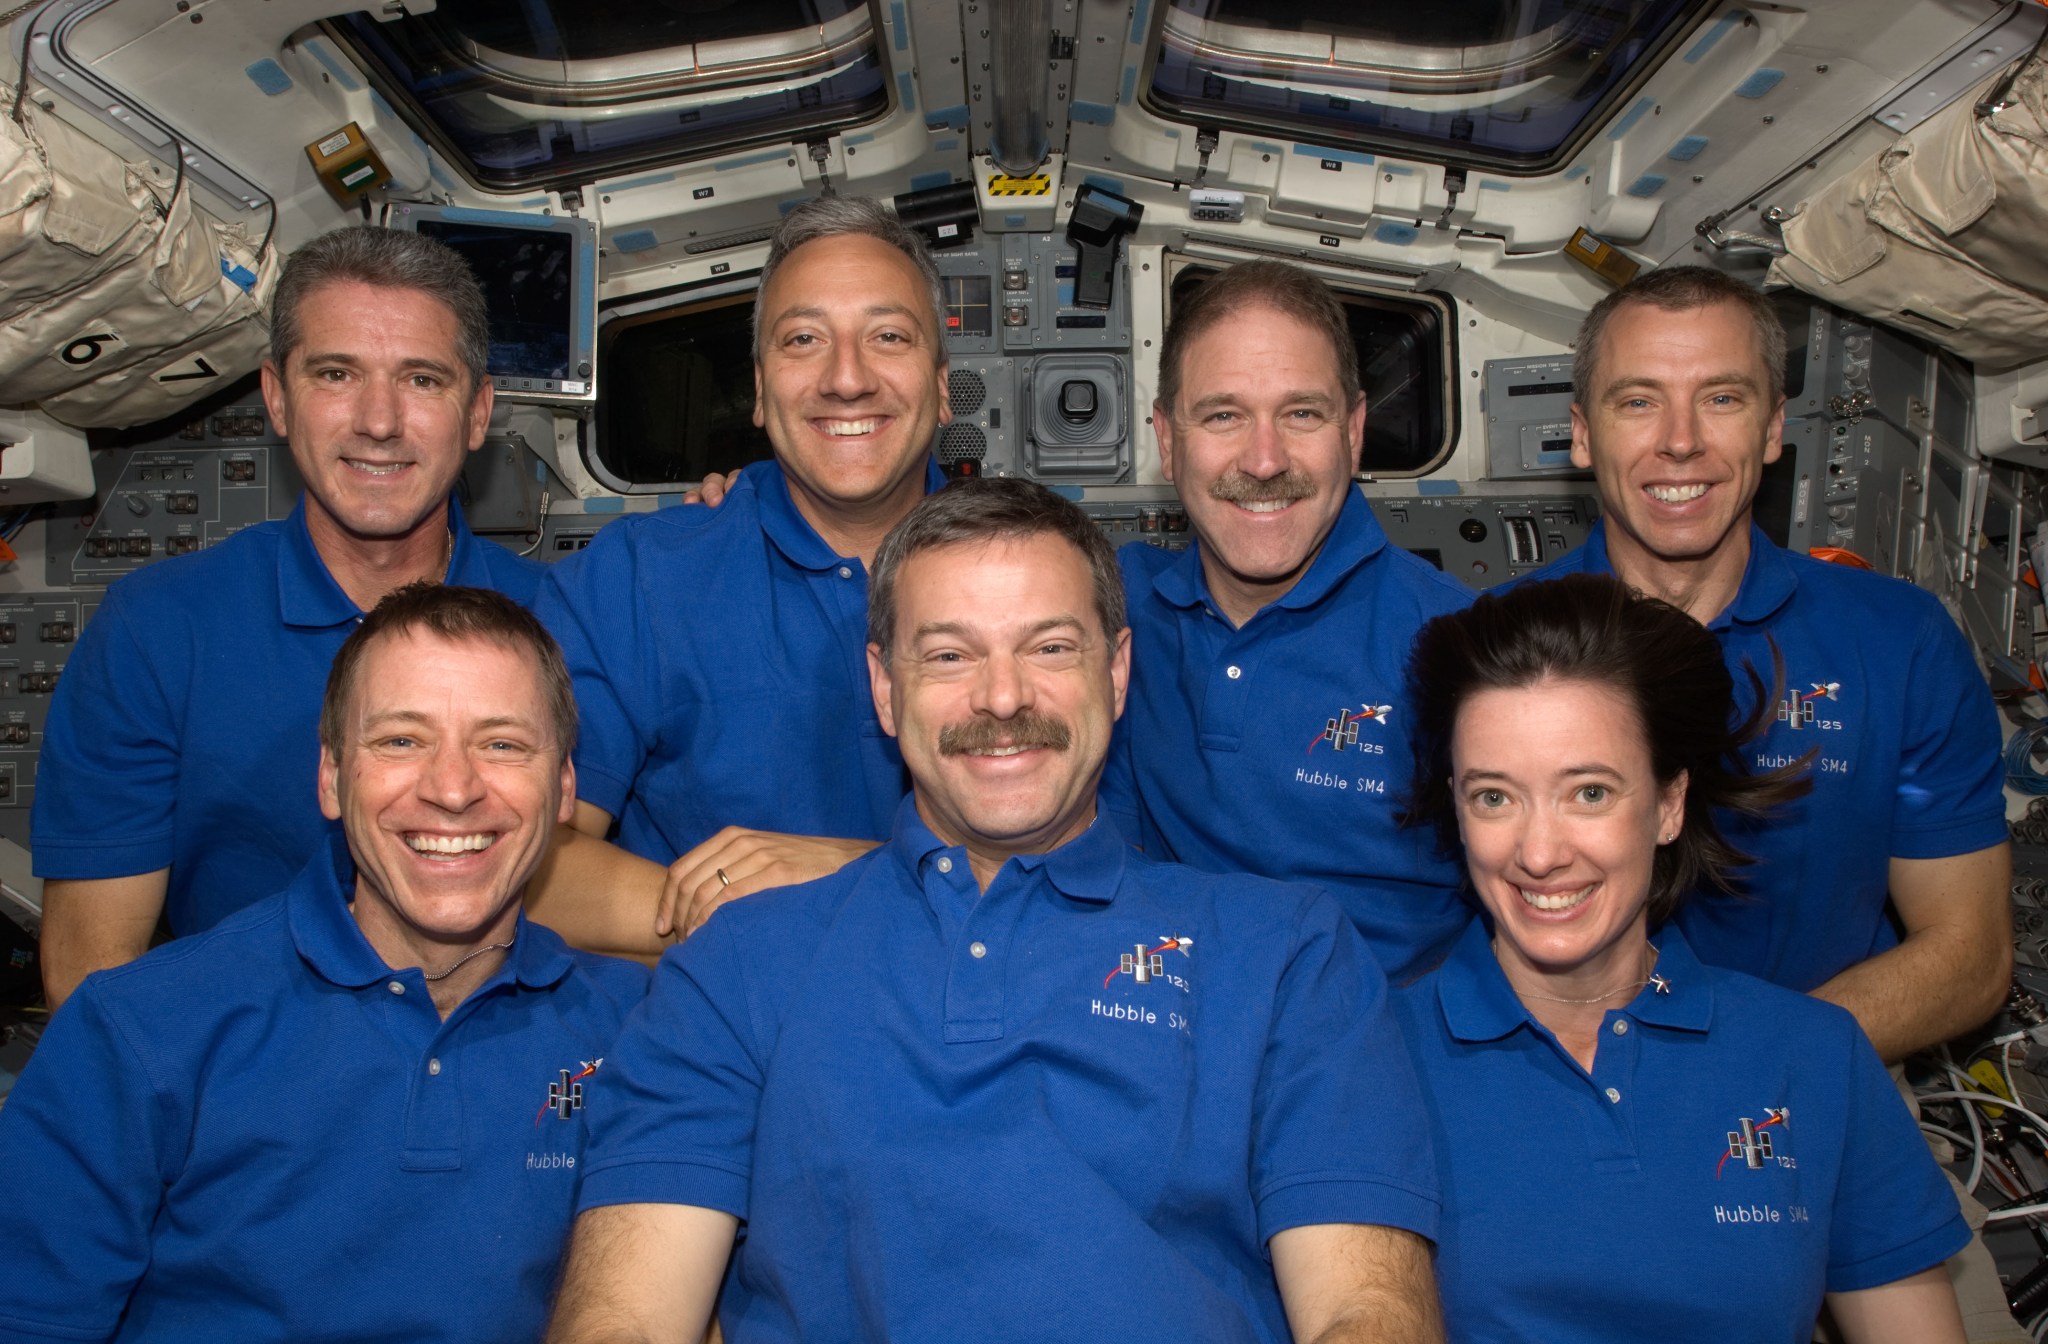 STS-125 crew poses in front of an American flag in the crew cabin of the shuttle.